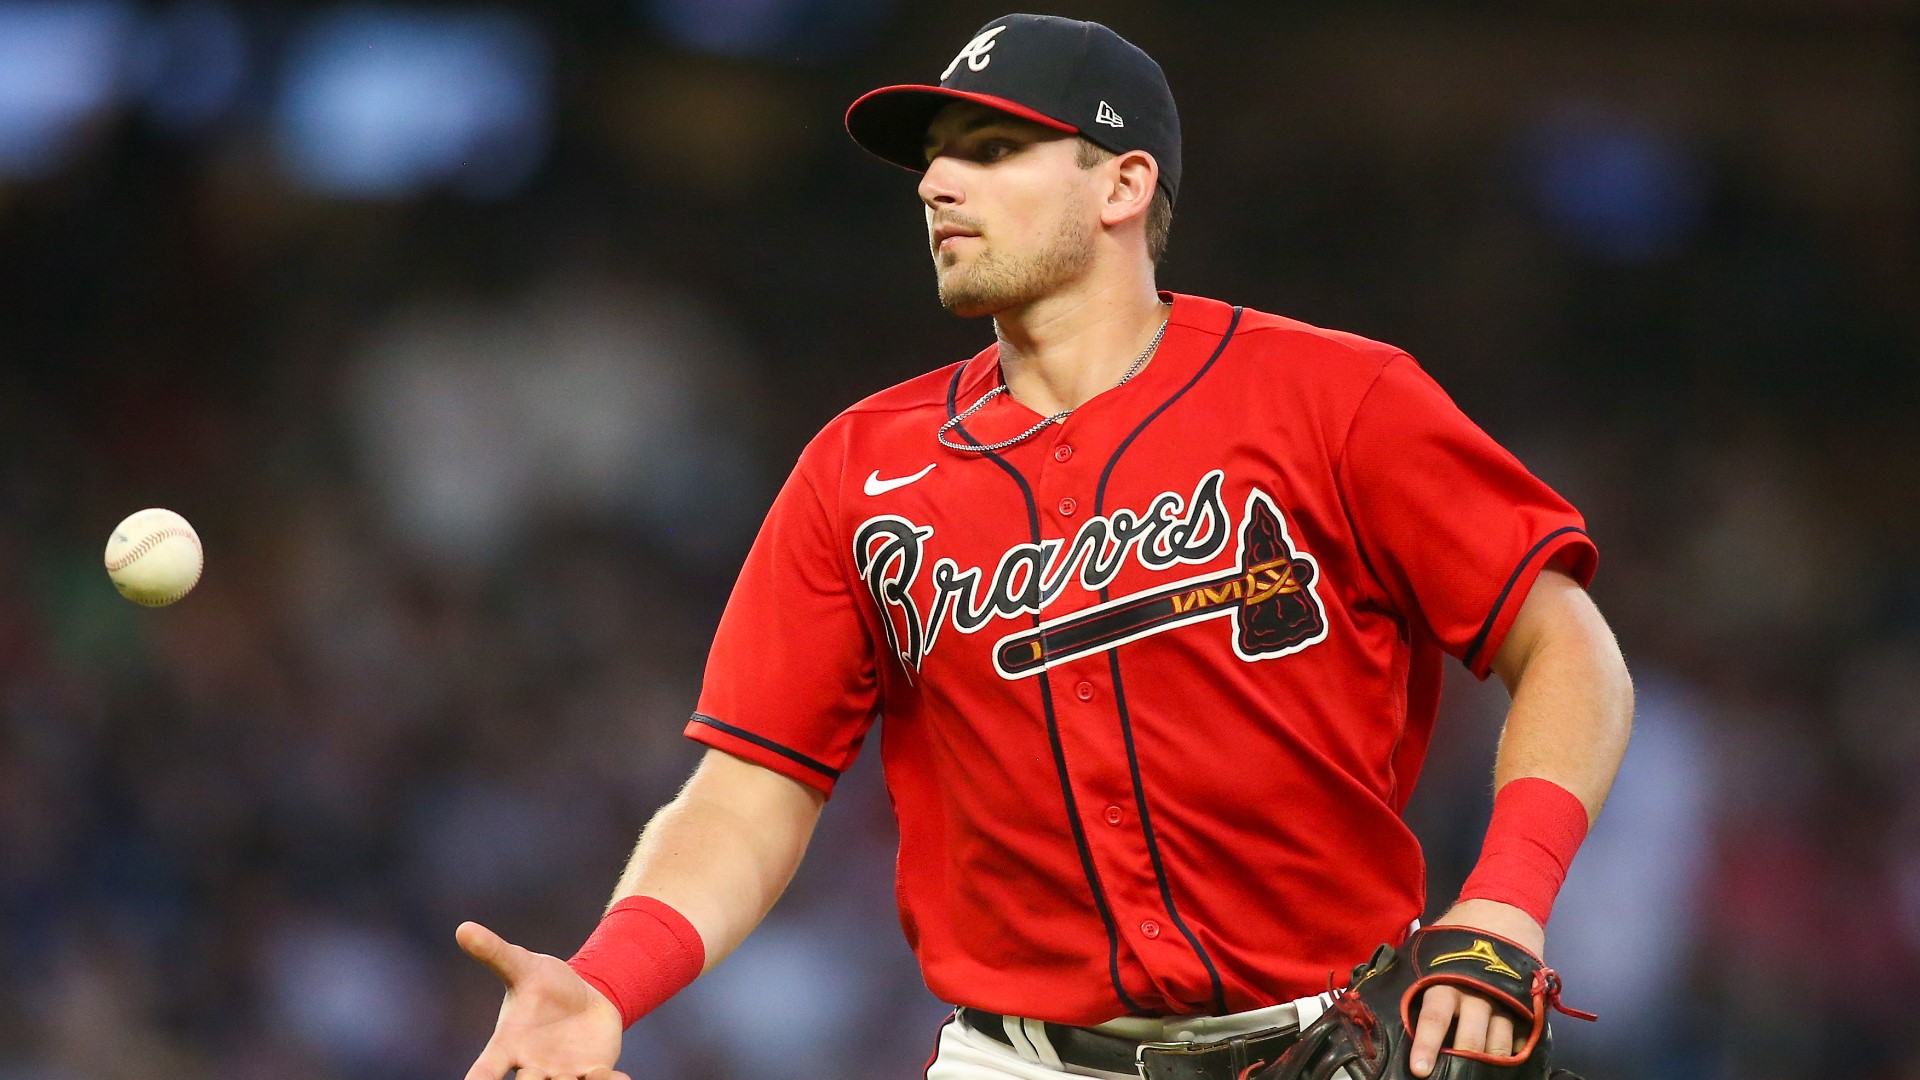 Here's why Braves insider Grant McAuley chose third baseman Austin Riley, catcher Travis d’Arnaud and more as his game-changers of the week.